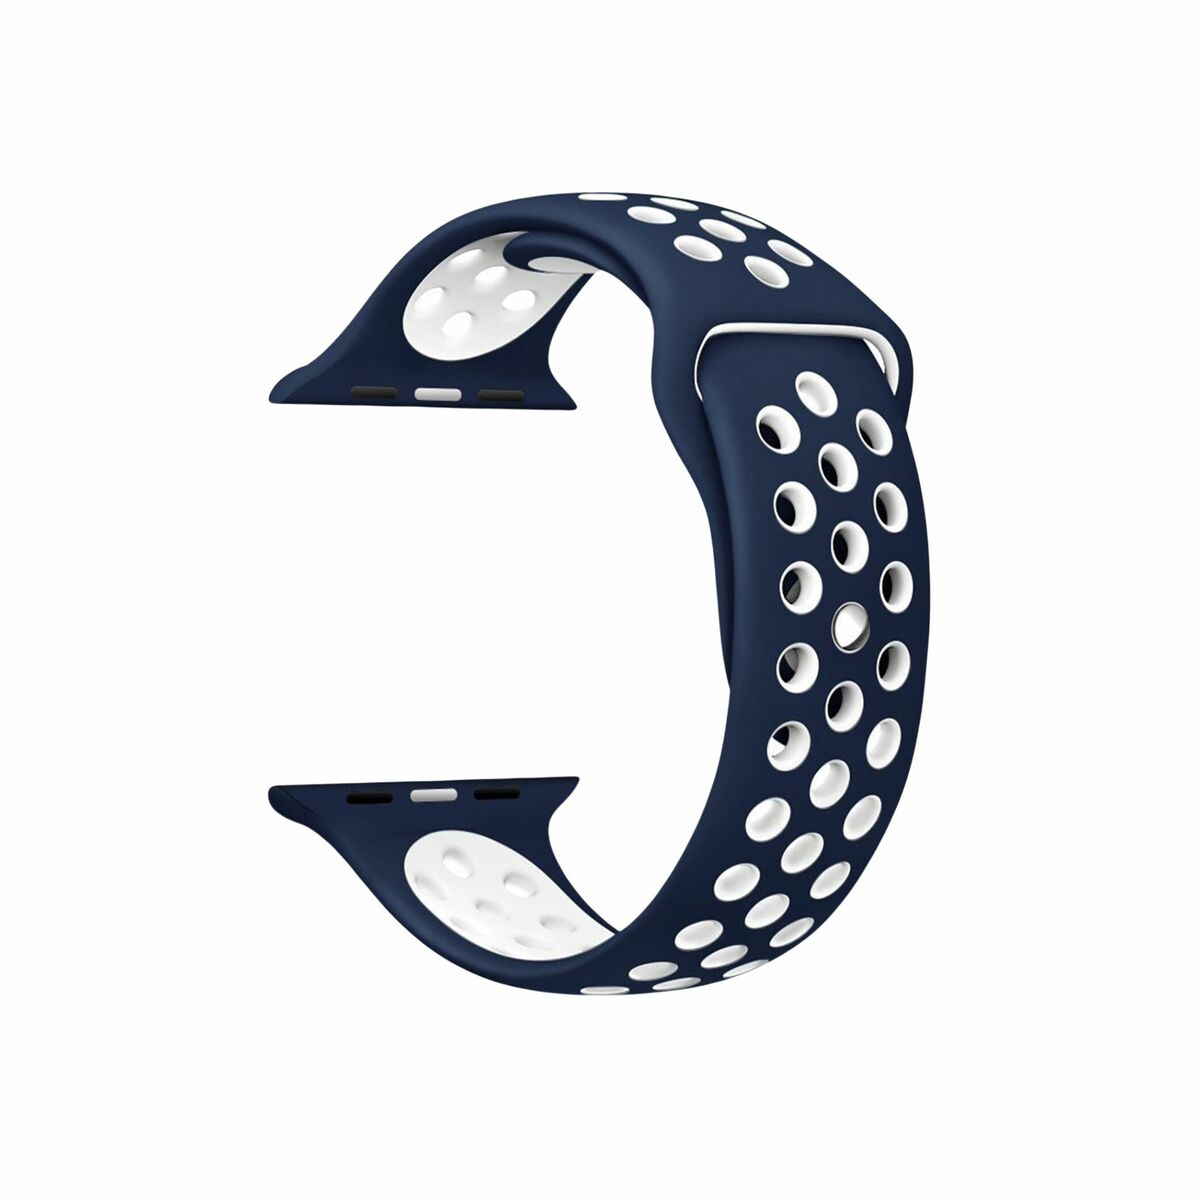 Watch Strap KSIX Apple Watch/Urban, KSIX, Sports and outdoors, Electronics and devices, watch-strap-ksix-apple-watch-urban-4, :White, Brand_KSIX, category-reference-2609, category-reference-2617, category-reference-2634, category-reference-t-19756, category-reference-t-7034, category-reference-t-7035, Condition_NEW, deportista / en forma, original gifts, Price_20 - 50, telephones & tablets, vida sana, RiotNook